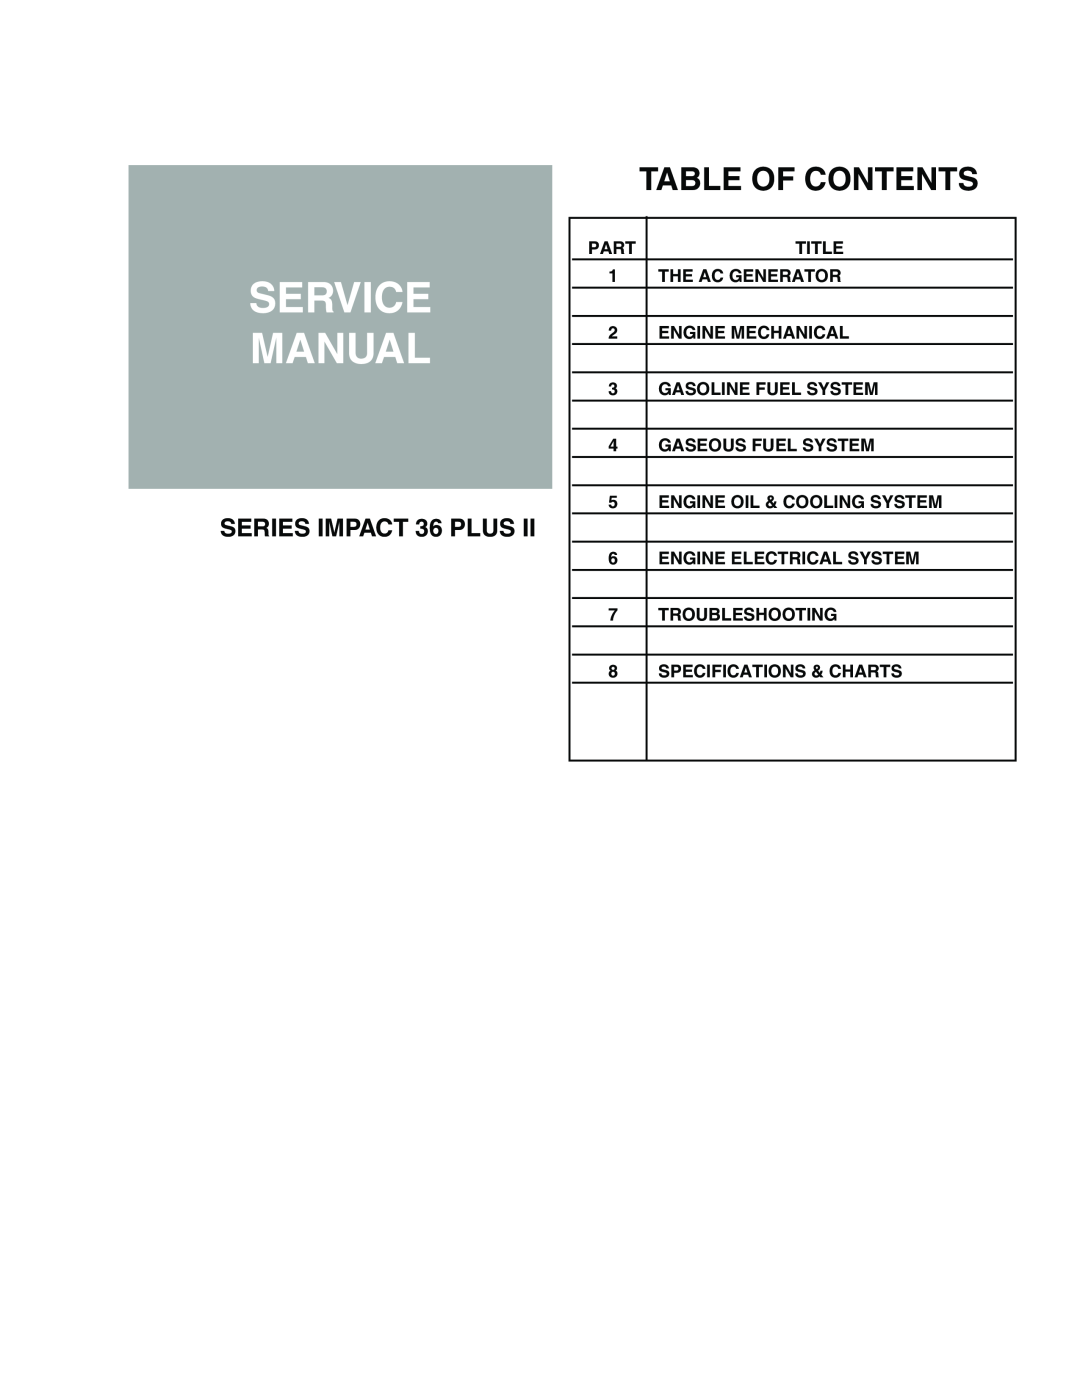 Generac Power Systems 941-2, 940-2 Service Manual, Table Of Contents, SERIES IMPACT 36 PLUS, Part, Title, The Ac Generator 